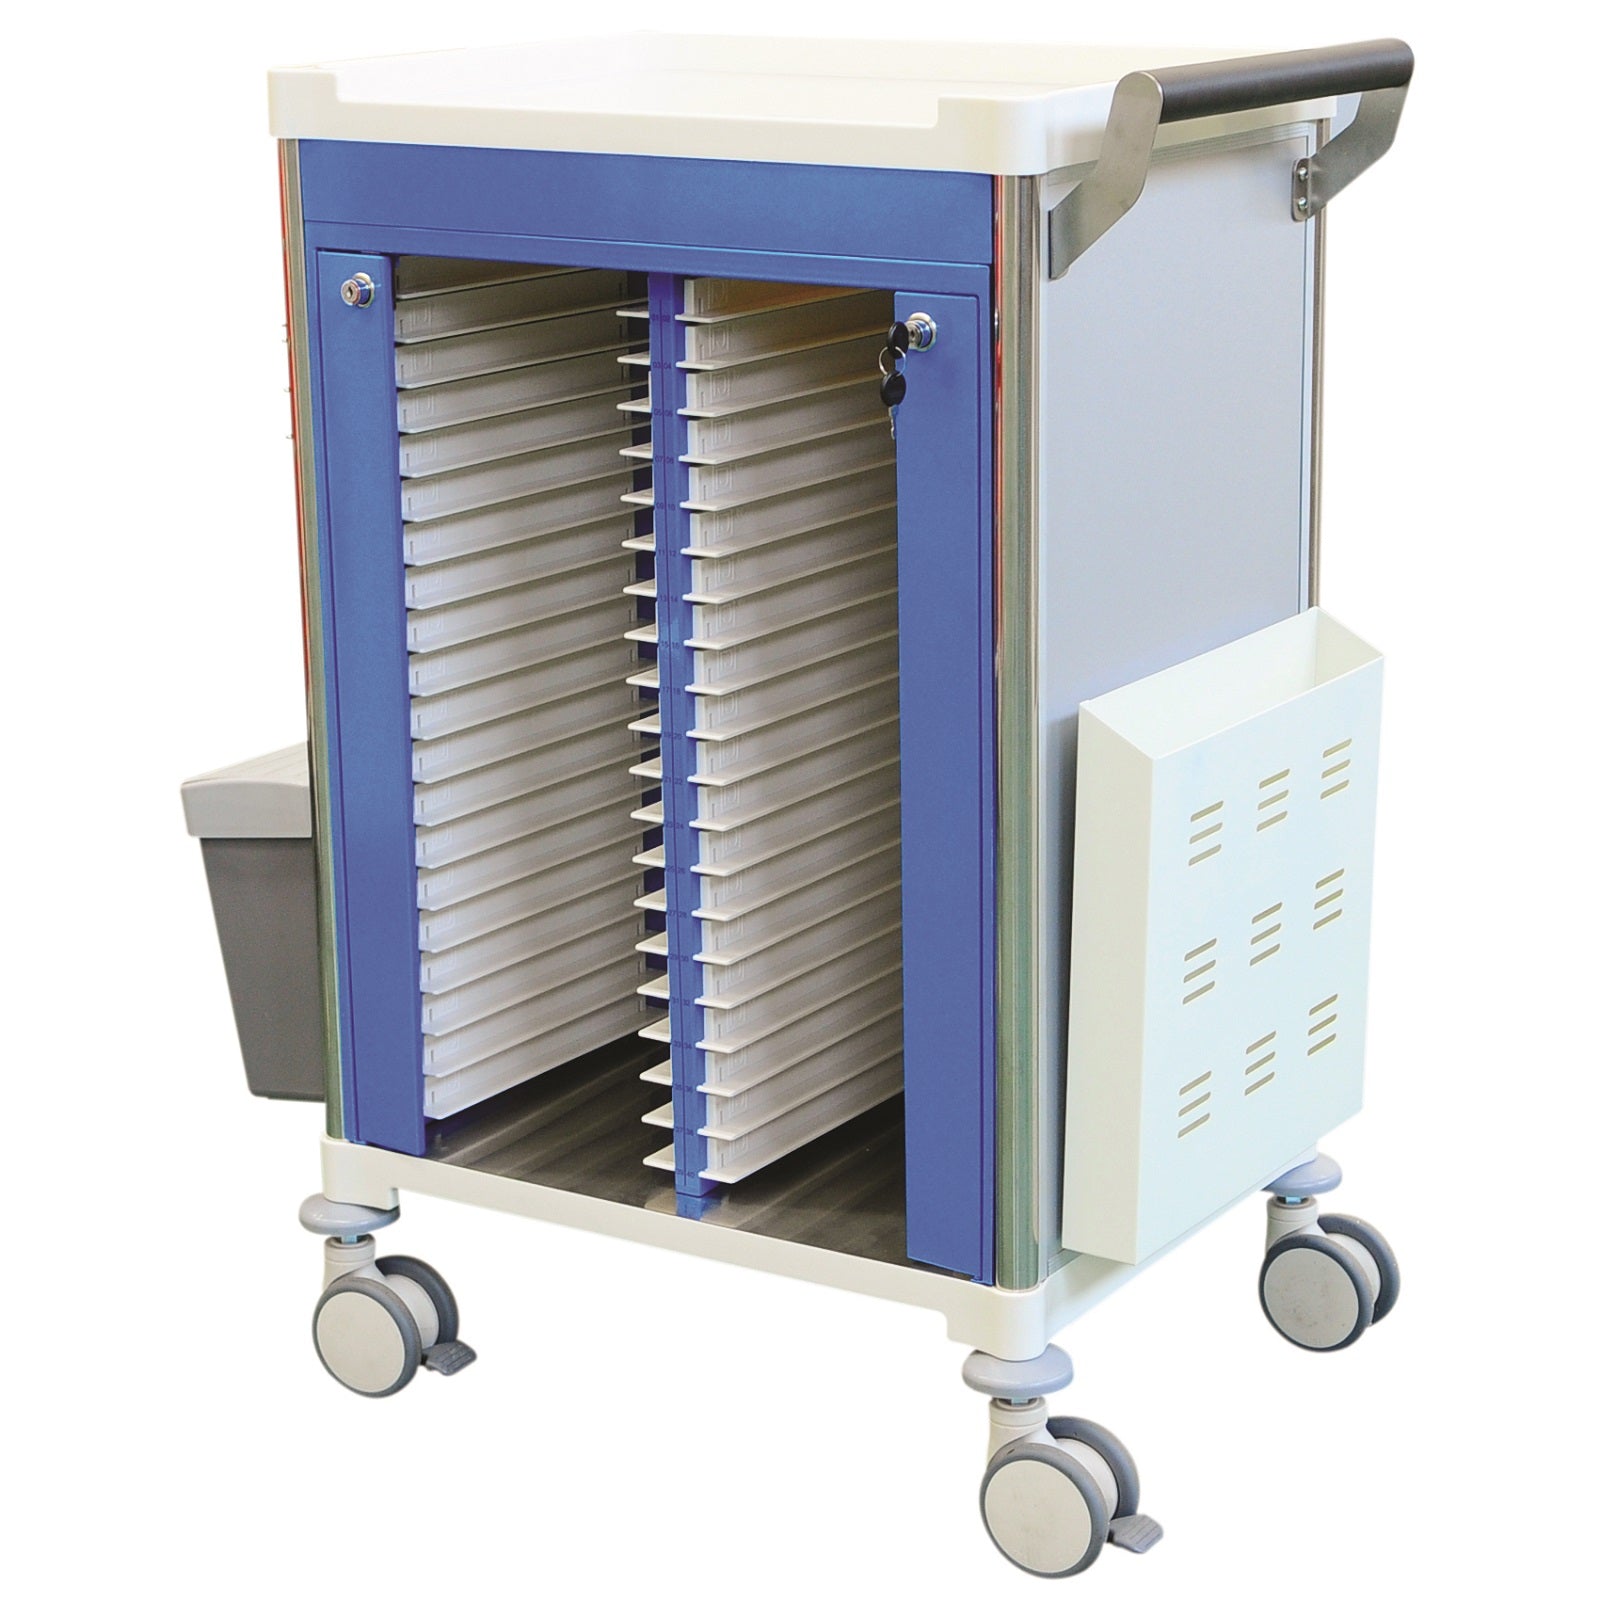 A full featured medical records trolley including all accessories. A great addition to any healthcare facility.